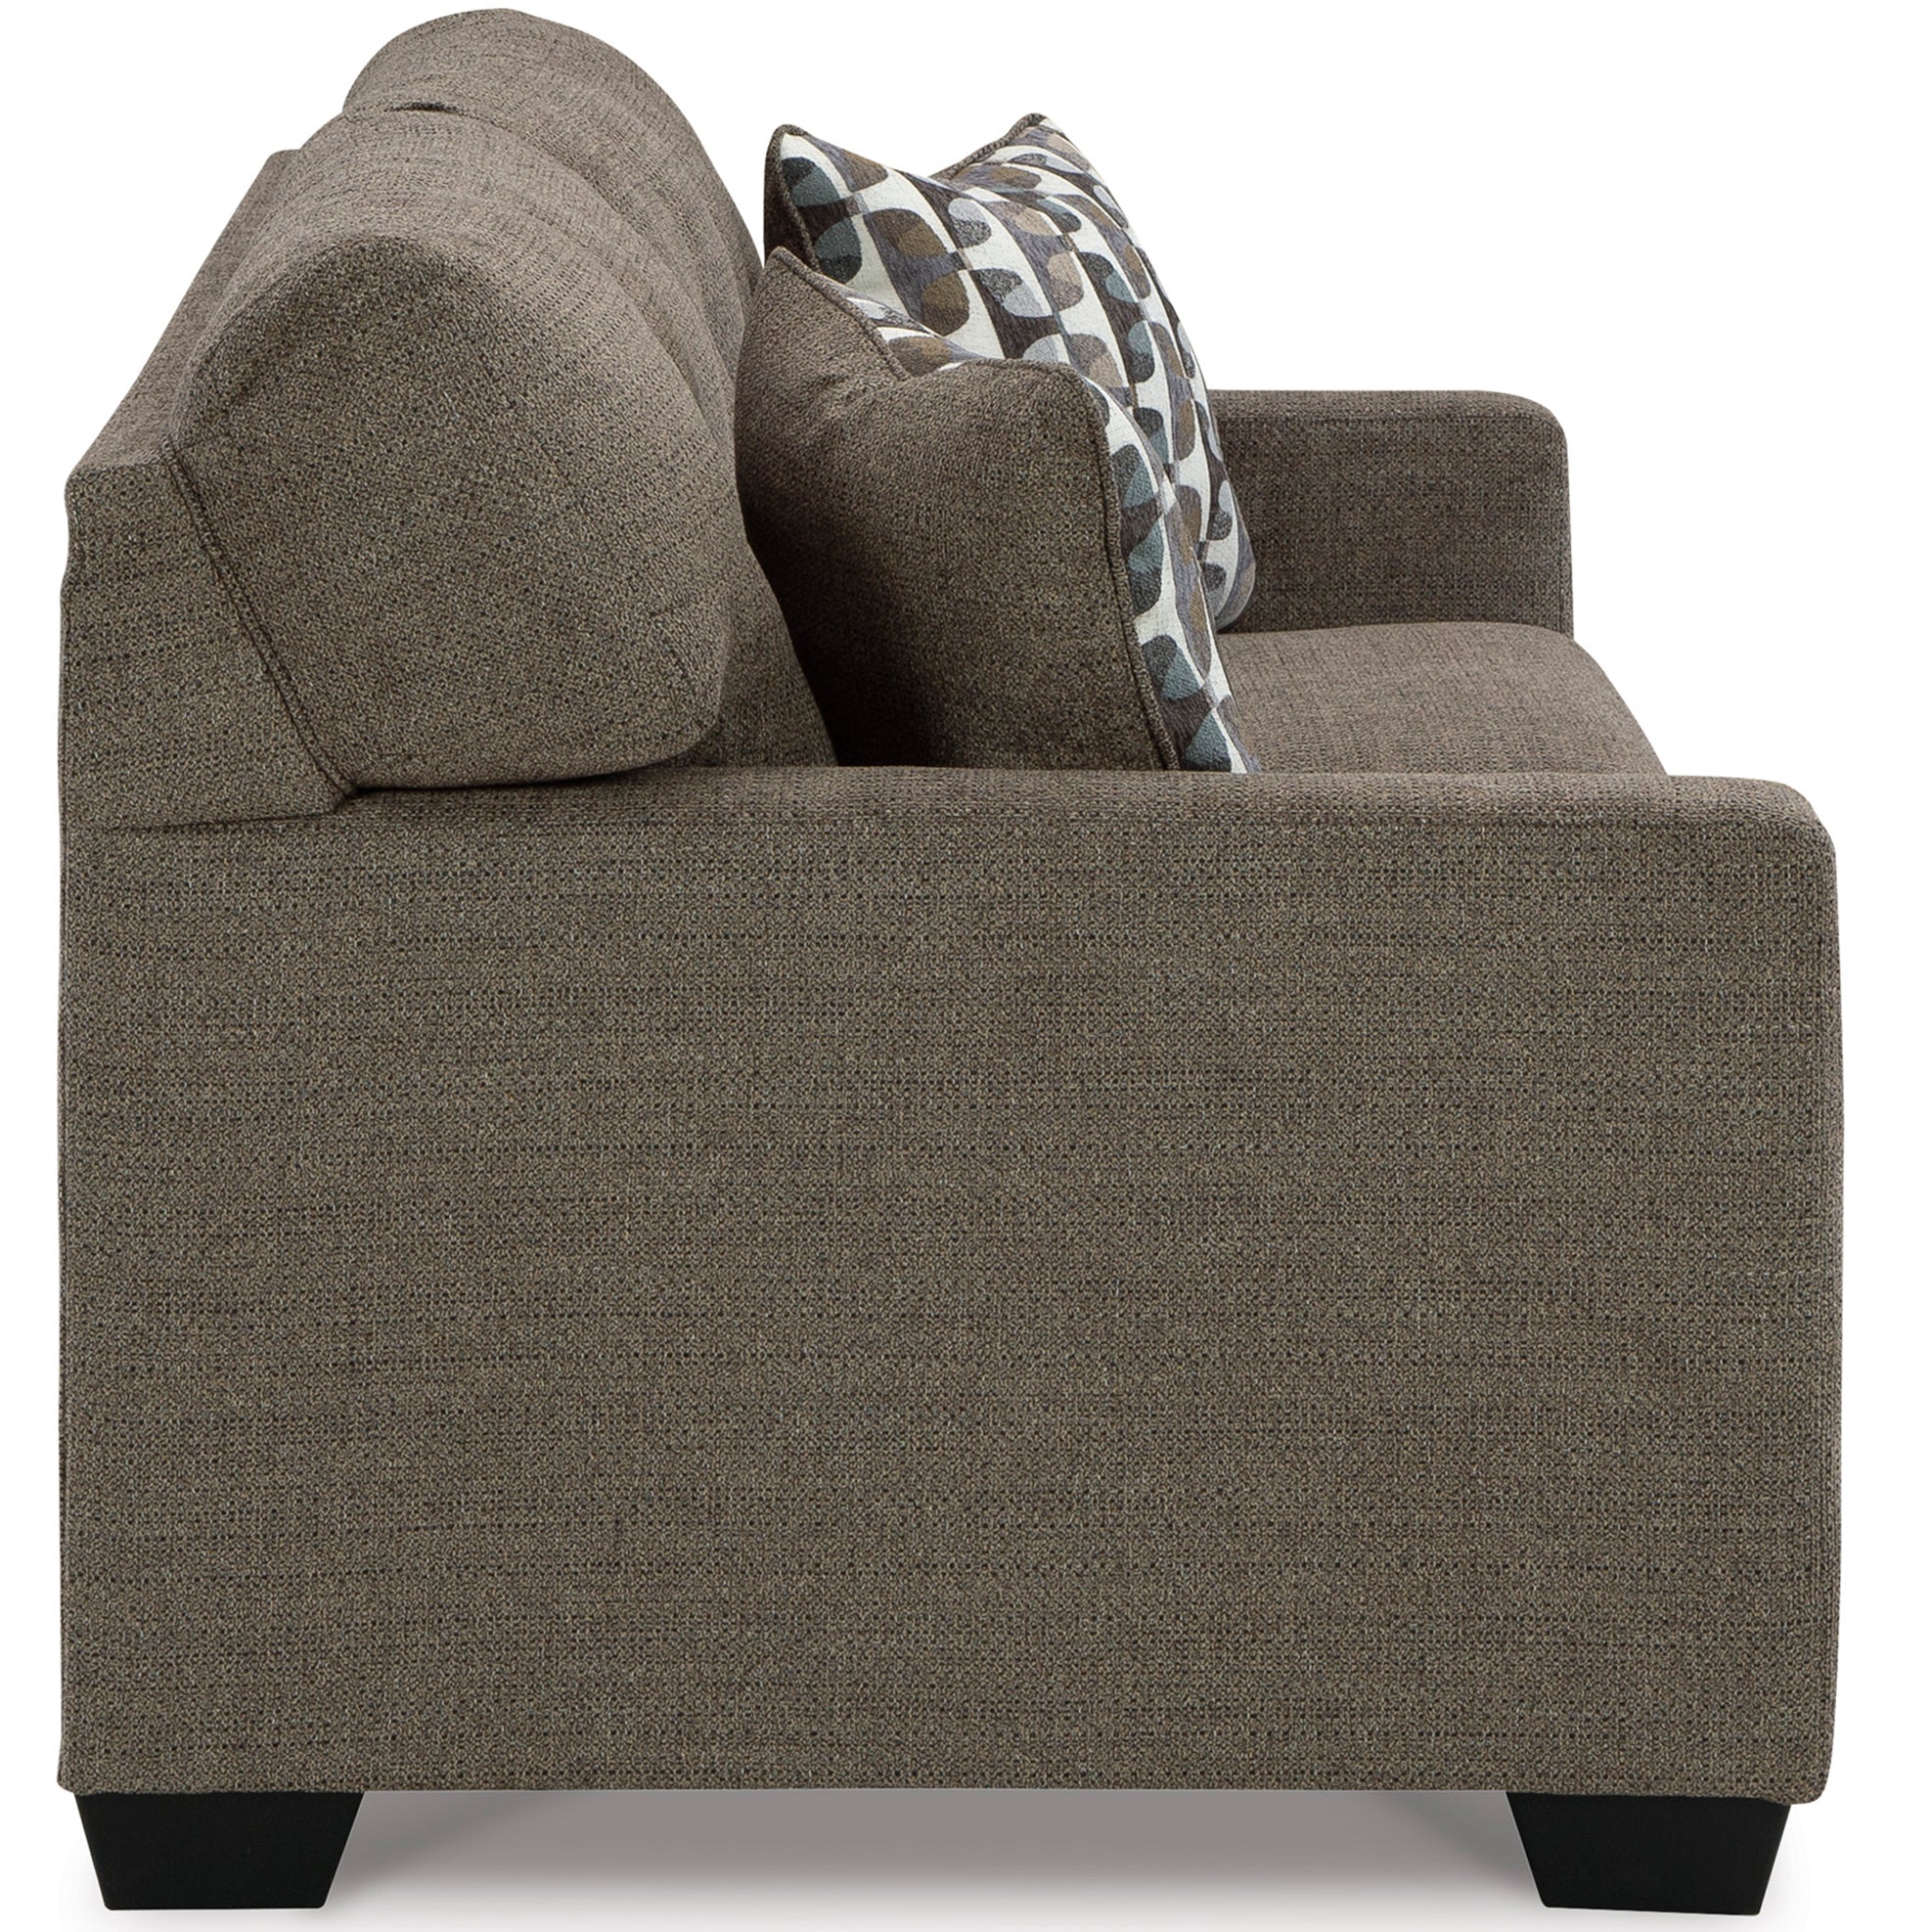 Comfortable and chic Mahoney Sofa in chocolate, provides ample seating with a touch of luxury